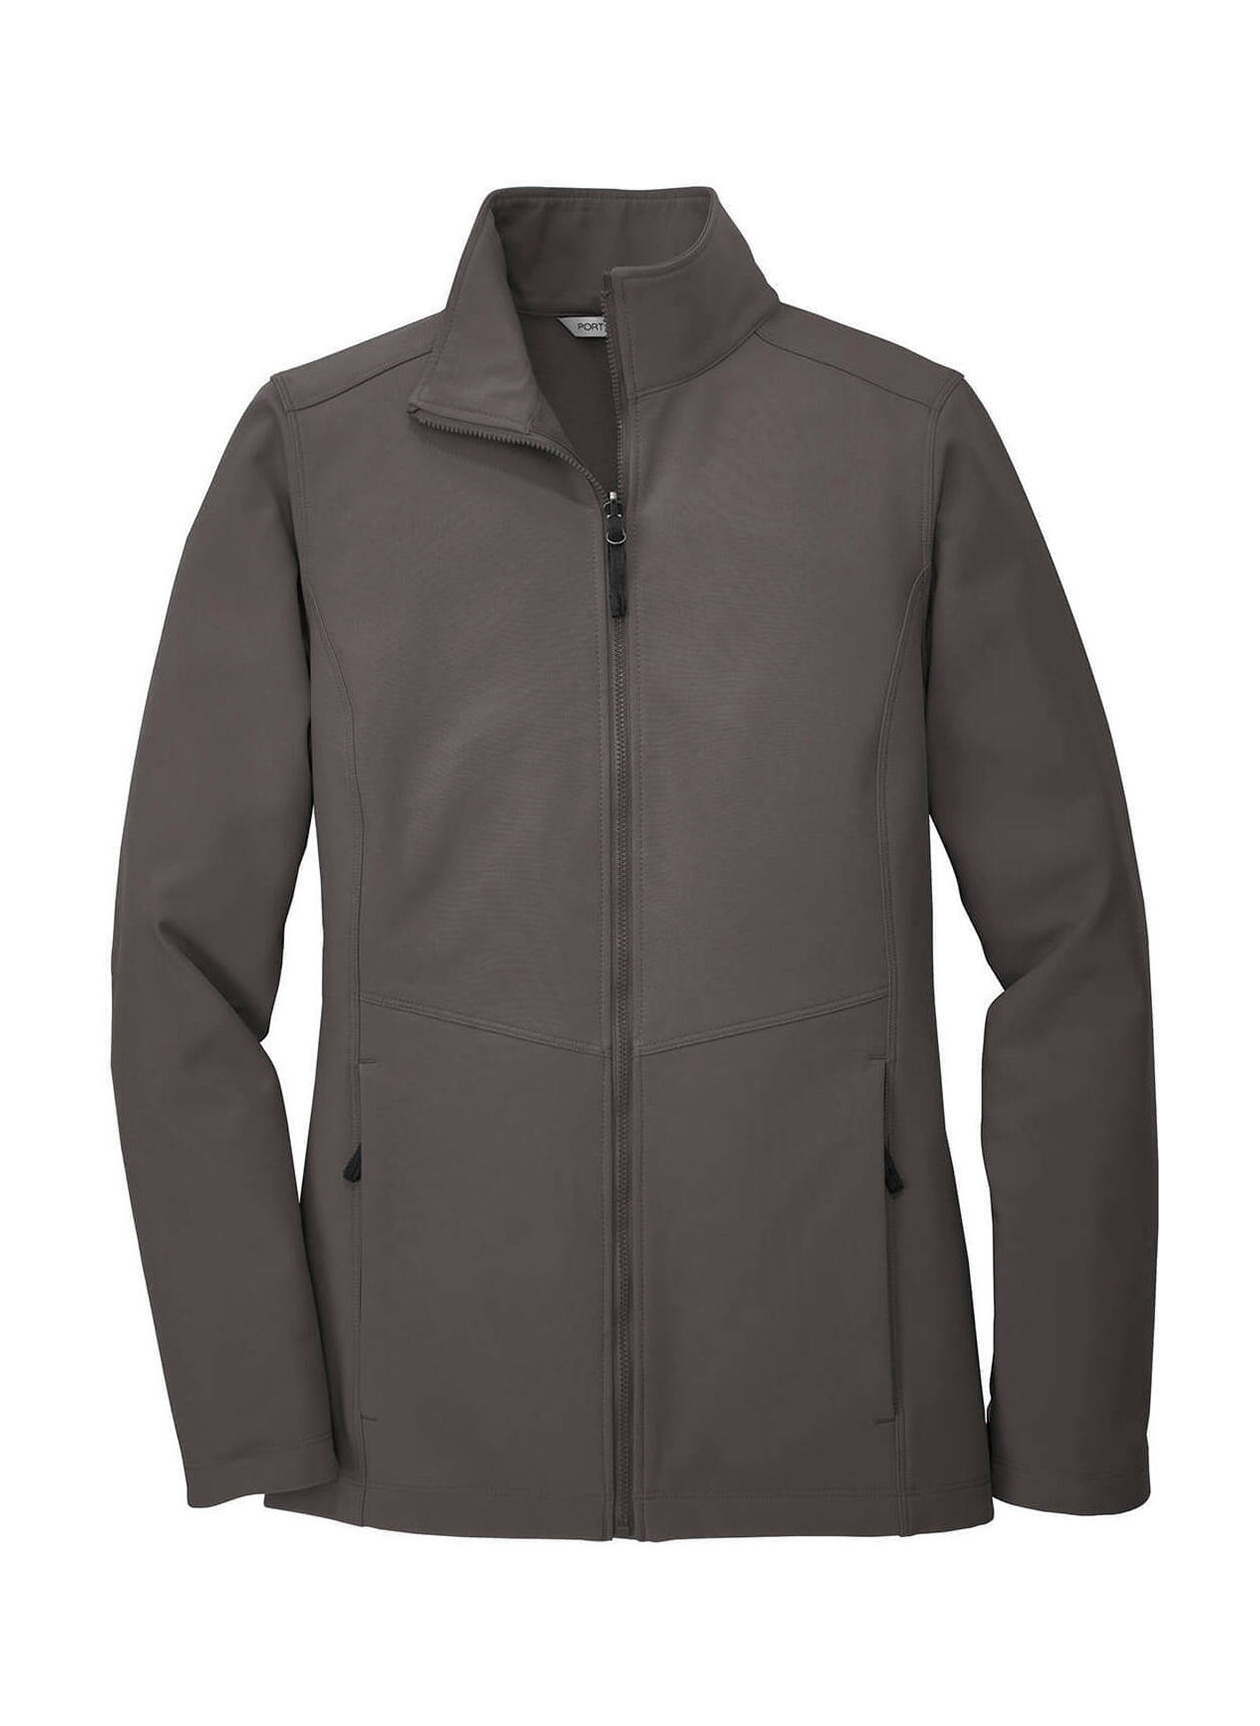 Port Authority Women's Graphite Collective Soft Shell Jacket